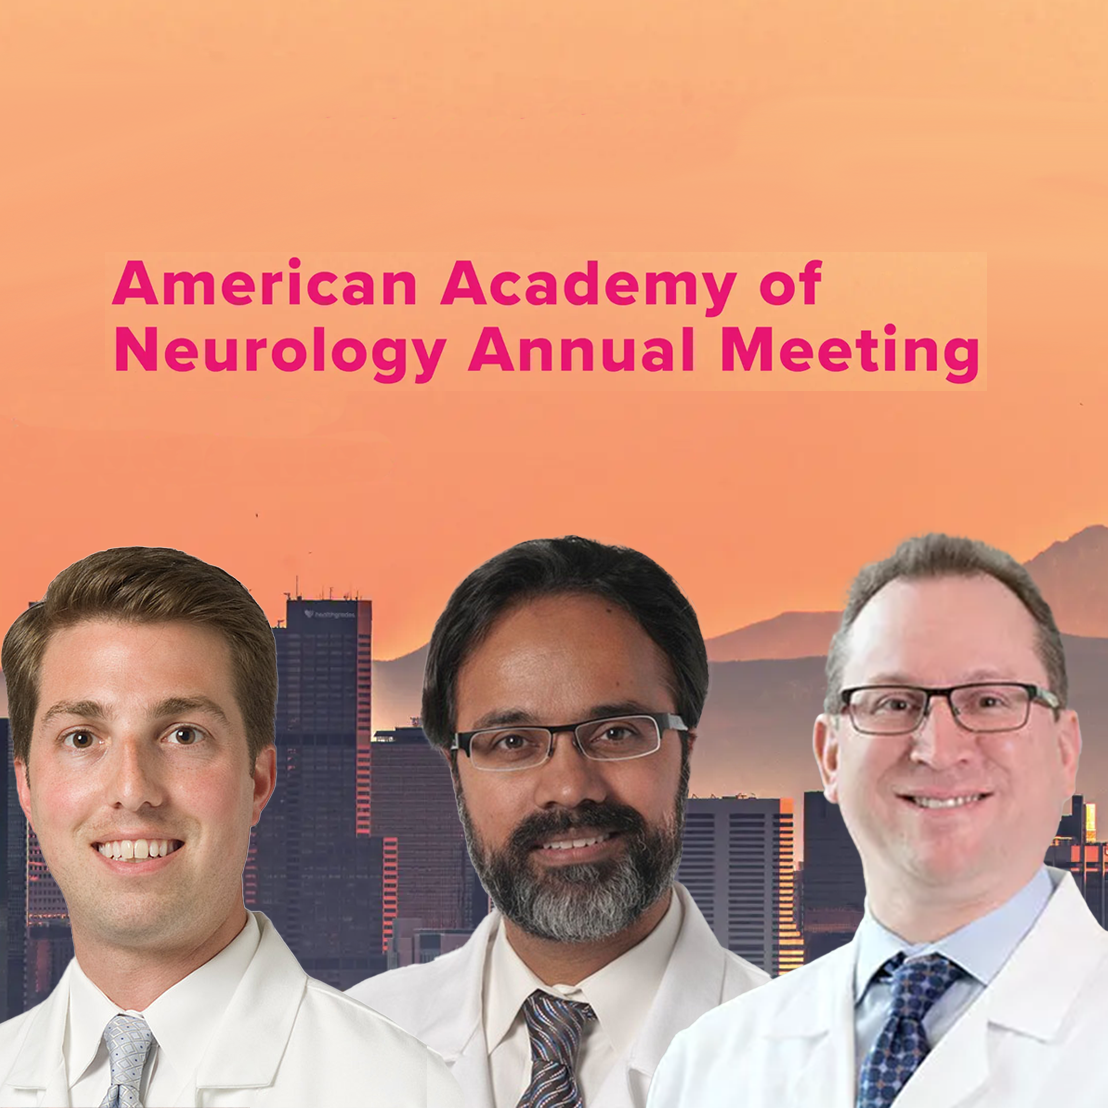 Post-AAN Perspectives: Recapping Major Areas of Growth in Neurology